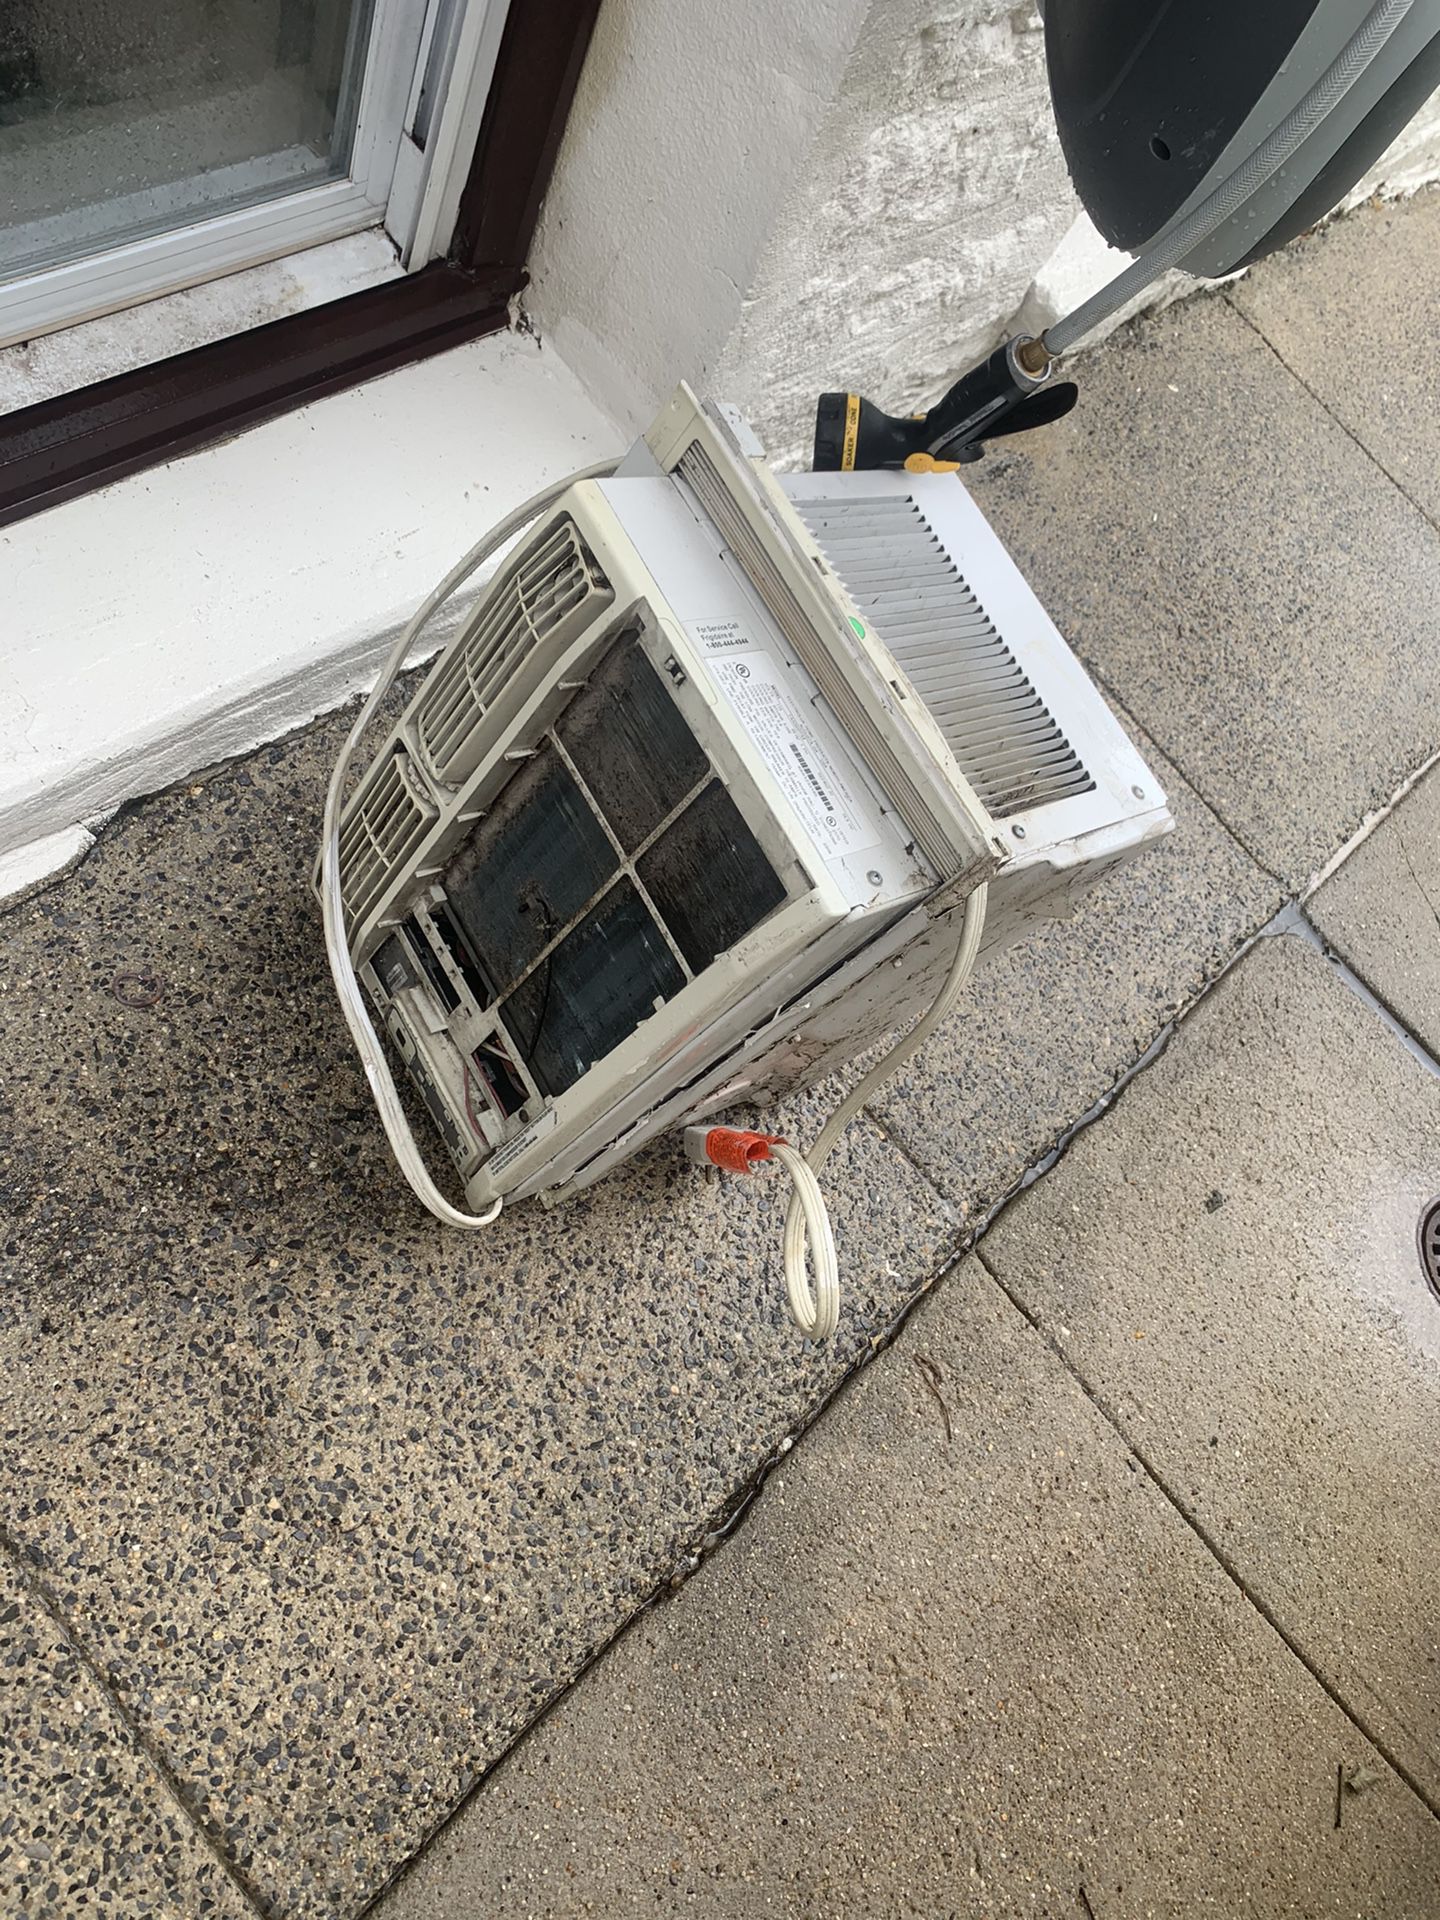 Working AC for free